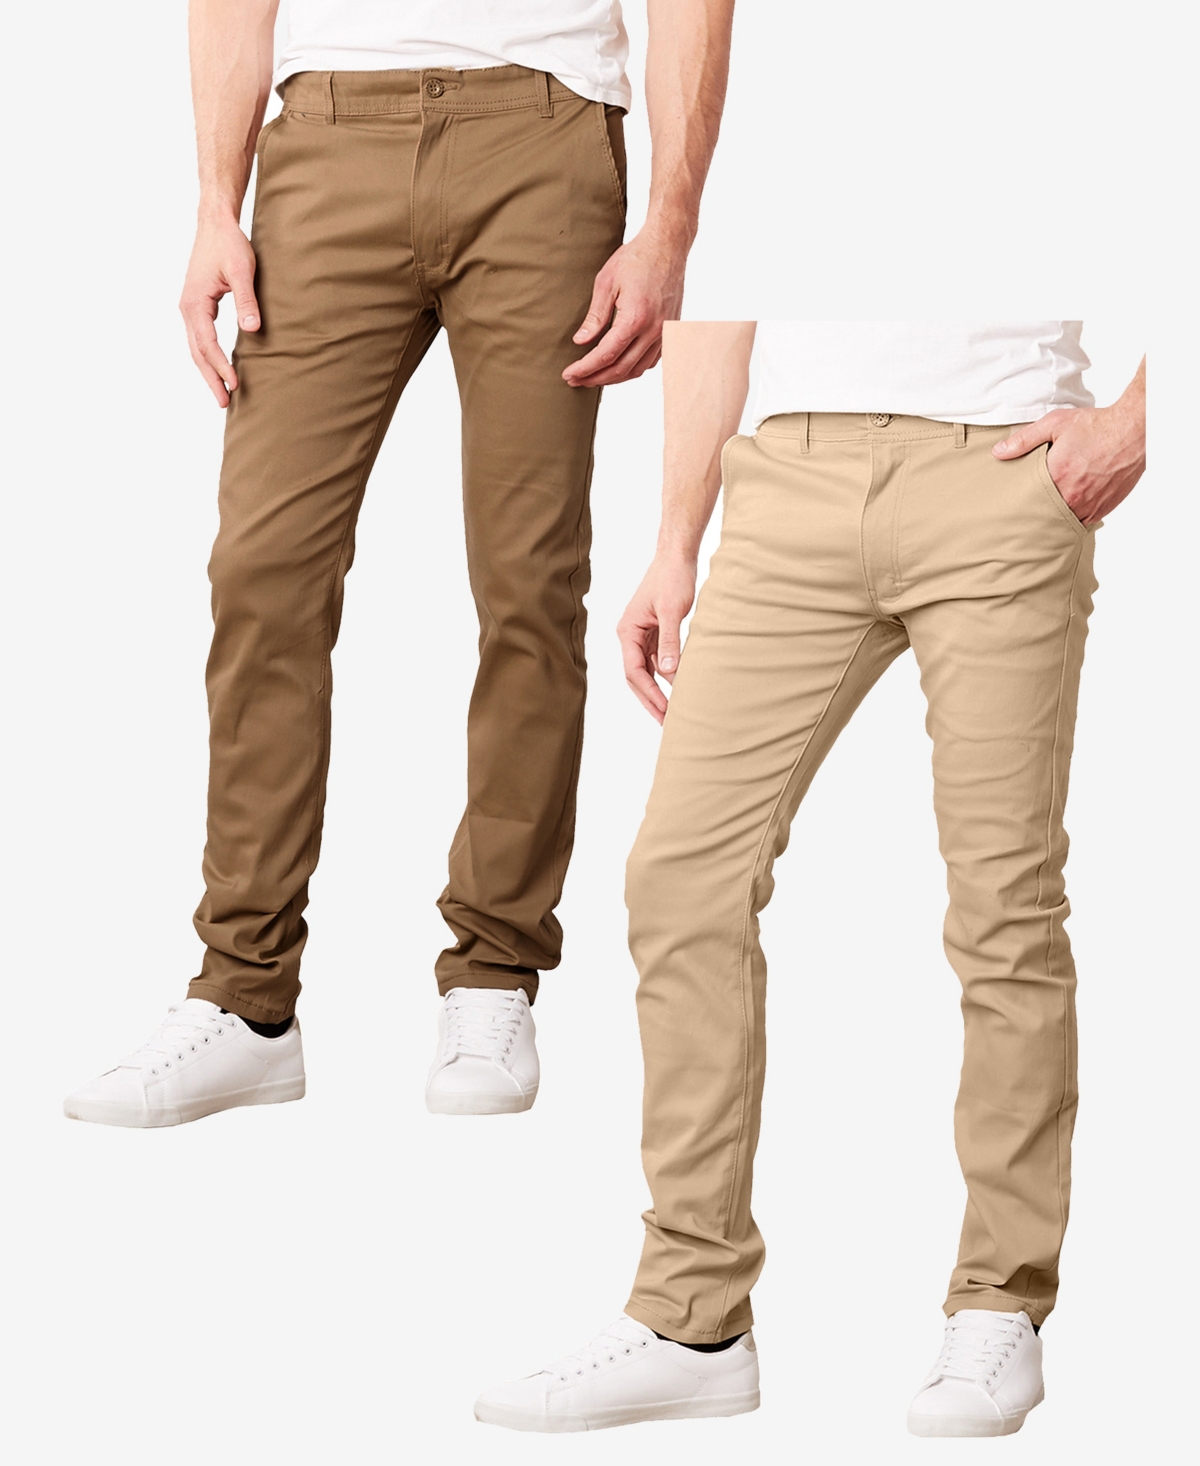 Galaxy By Harvic Men's Super Stretch Slim Fit Everyday Chino Pants, Pack Of 2 In Dark Khaki Khaki